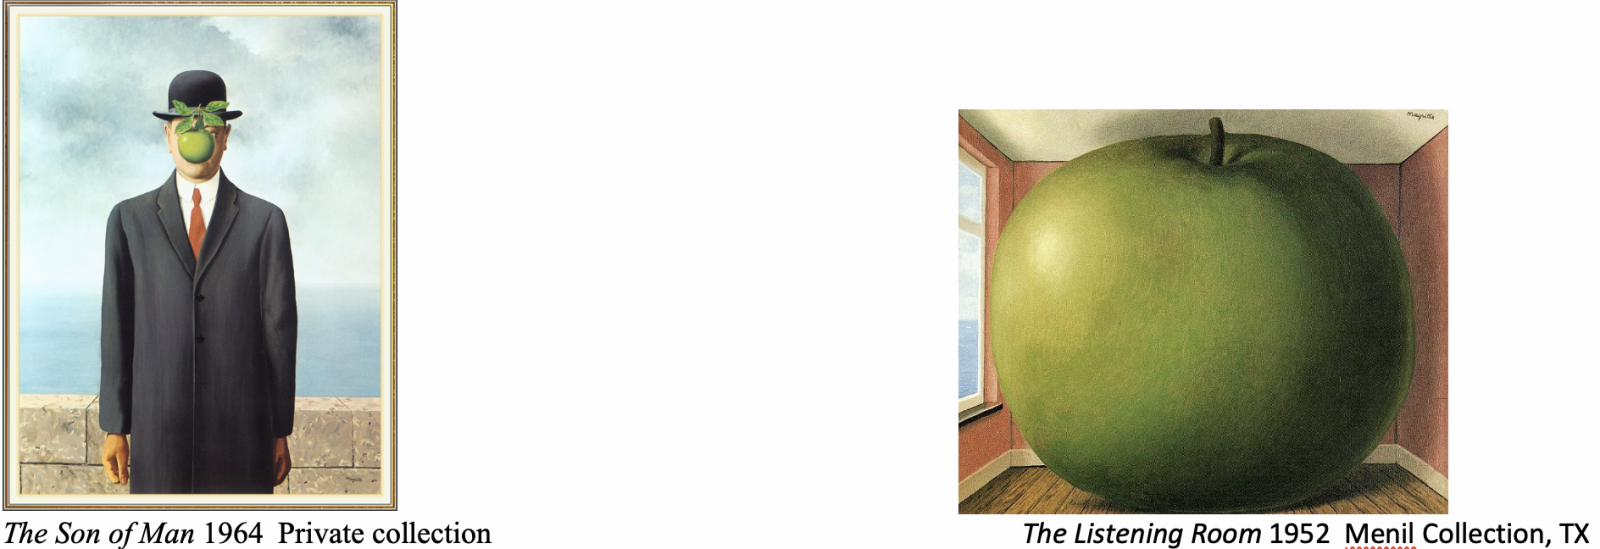 Magritte examples of artwork